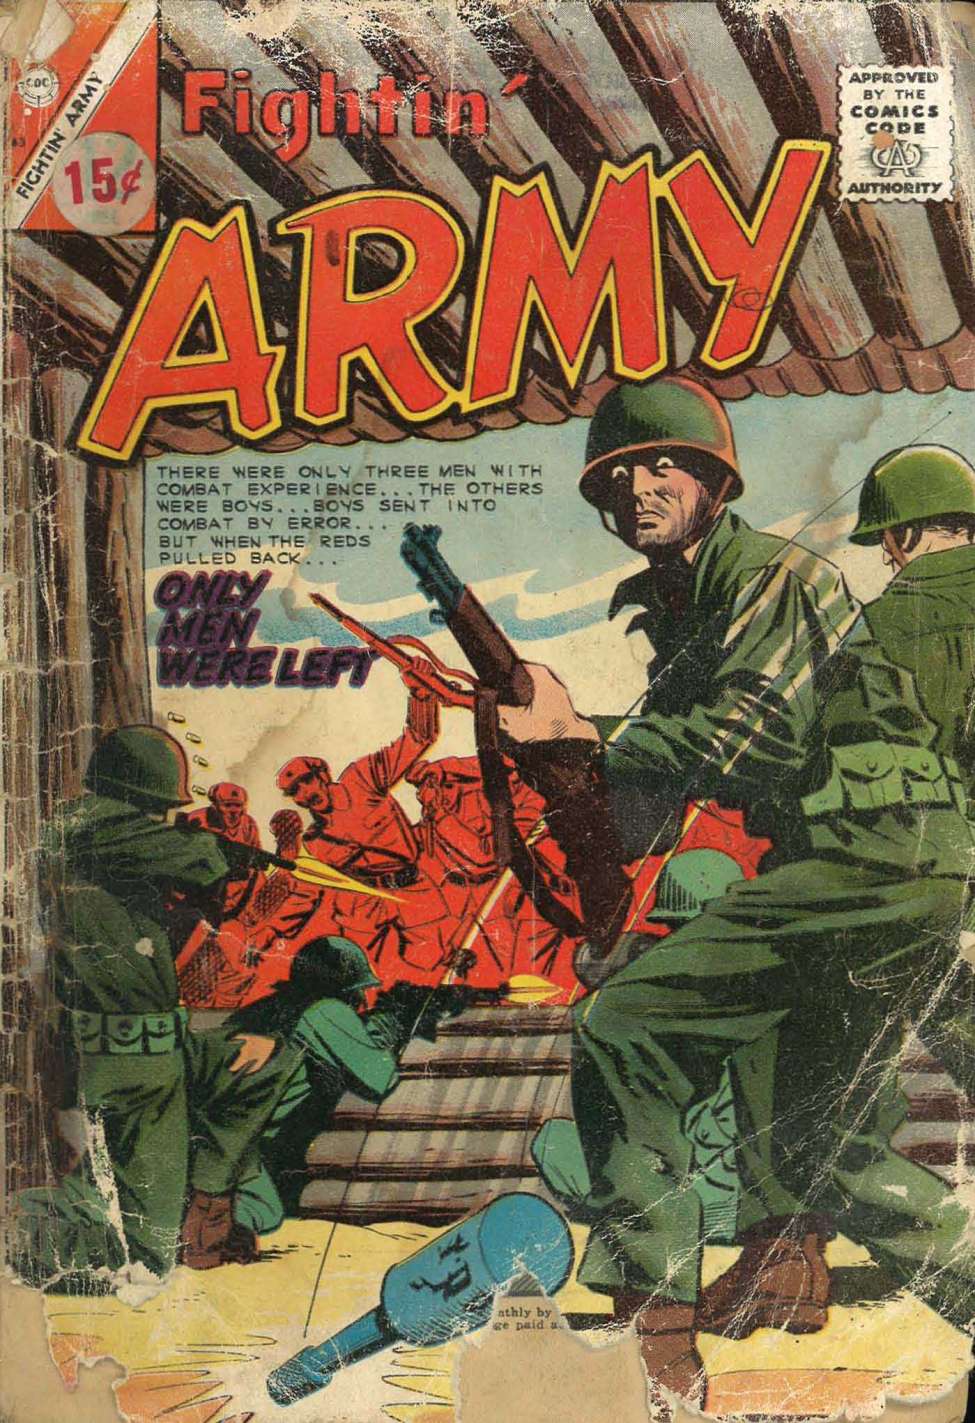 Book Cover For Fightin' Army 63 - Version 1